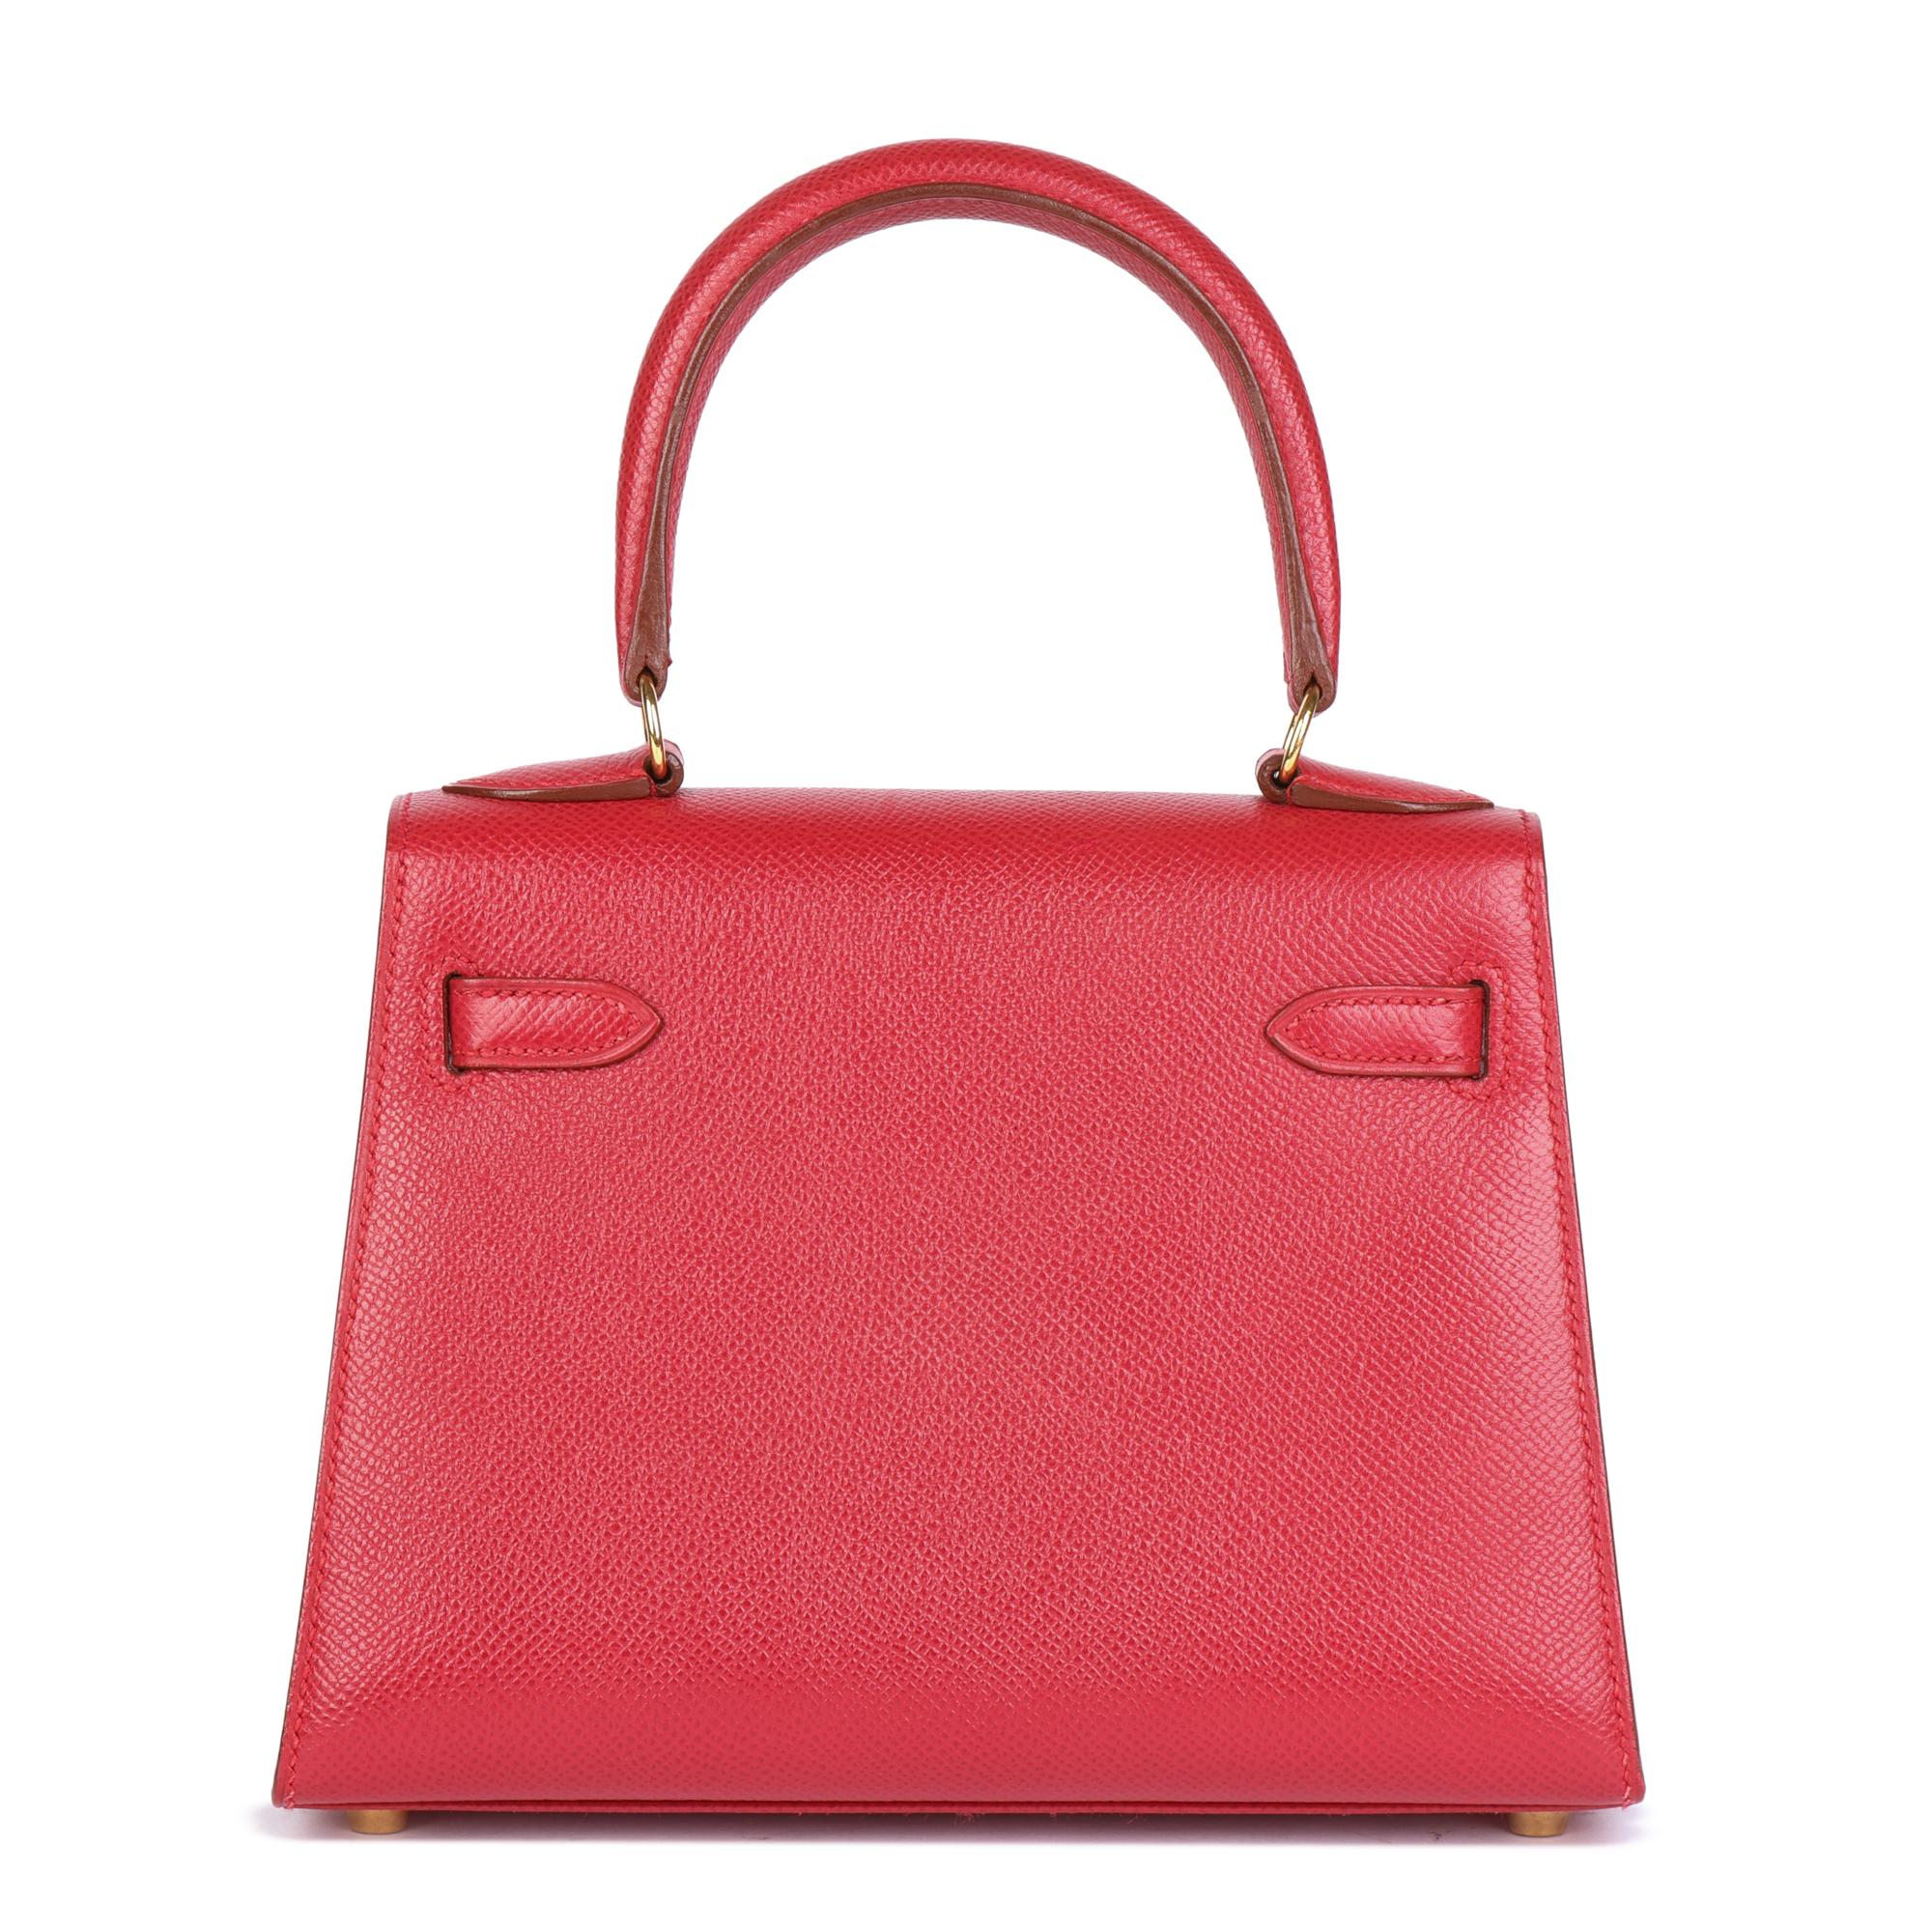 Hermès Rouge Vif Couchevel Leather Kelly 20cm Sellier In Excellent Condition For Sale In Bishop's Stortford, Hertfordshire